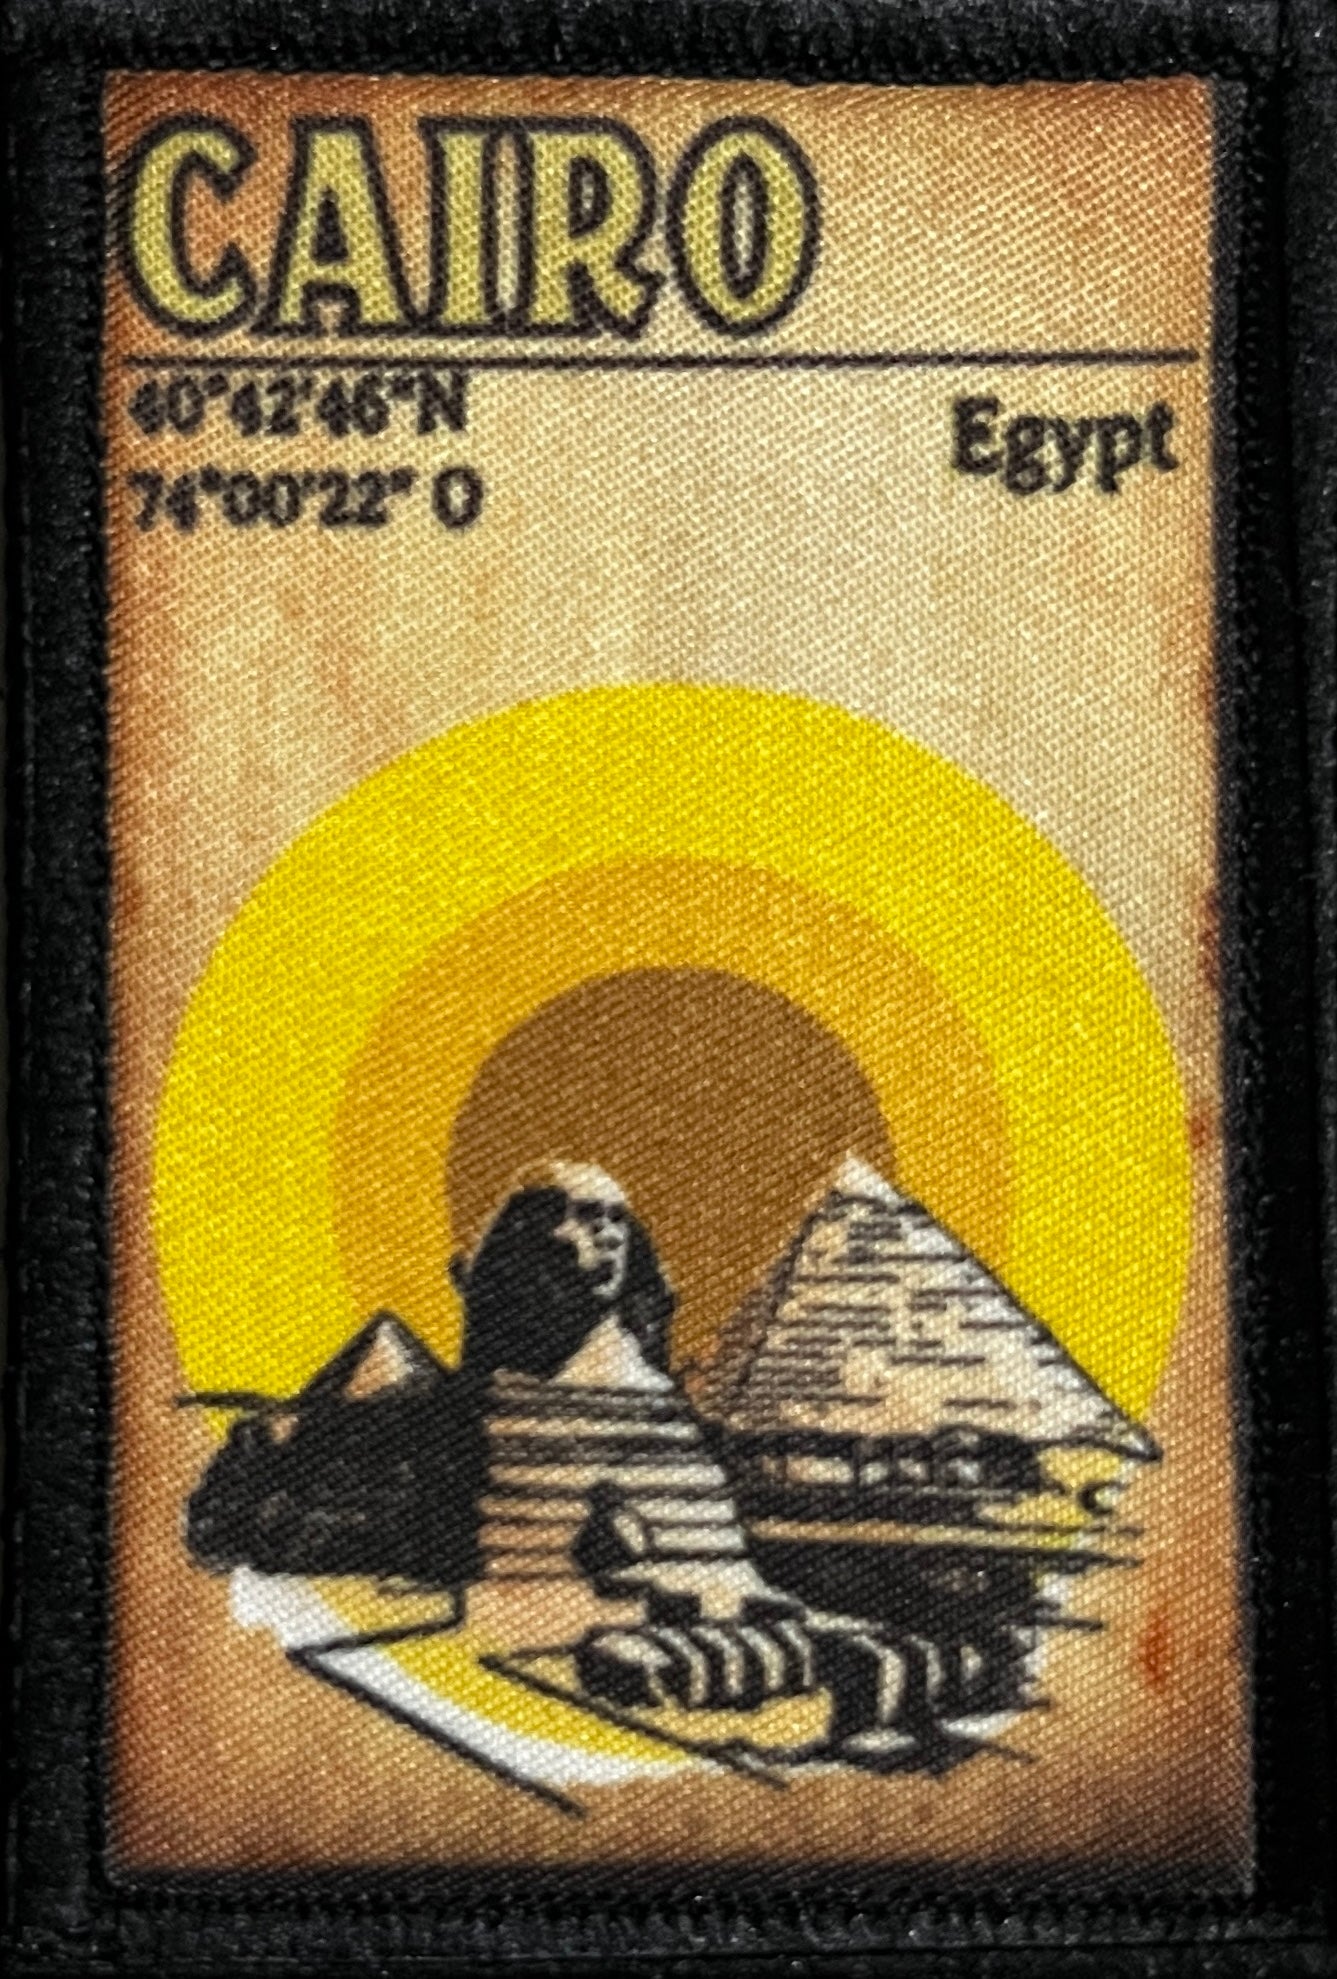 Cairo Egypt Pyramids Morale Patch 2x3" Morale Patches Redheaded T Shirts 